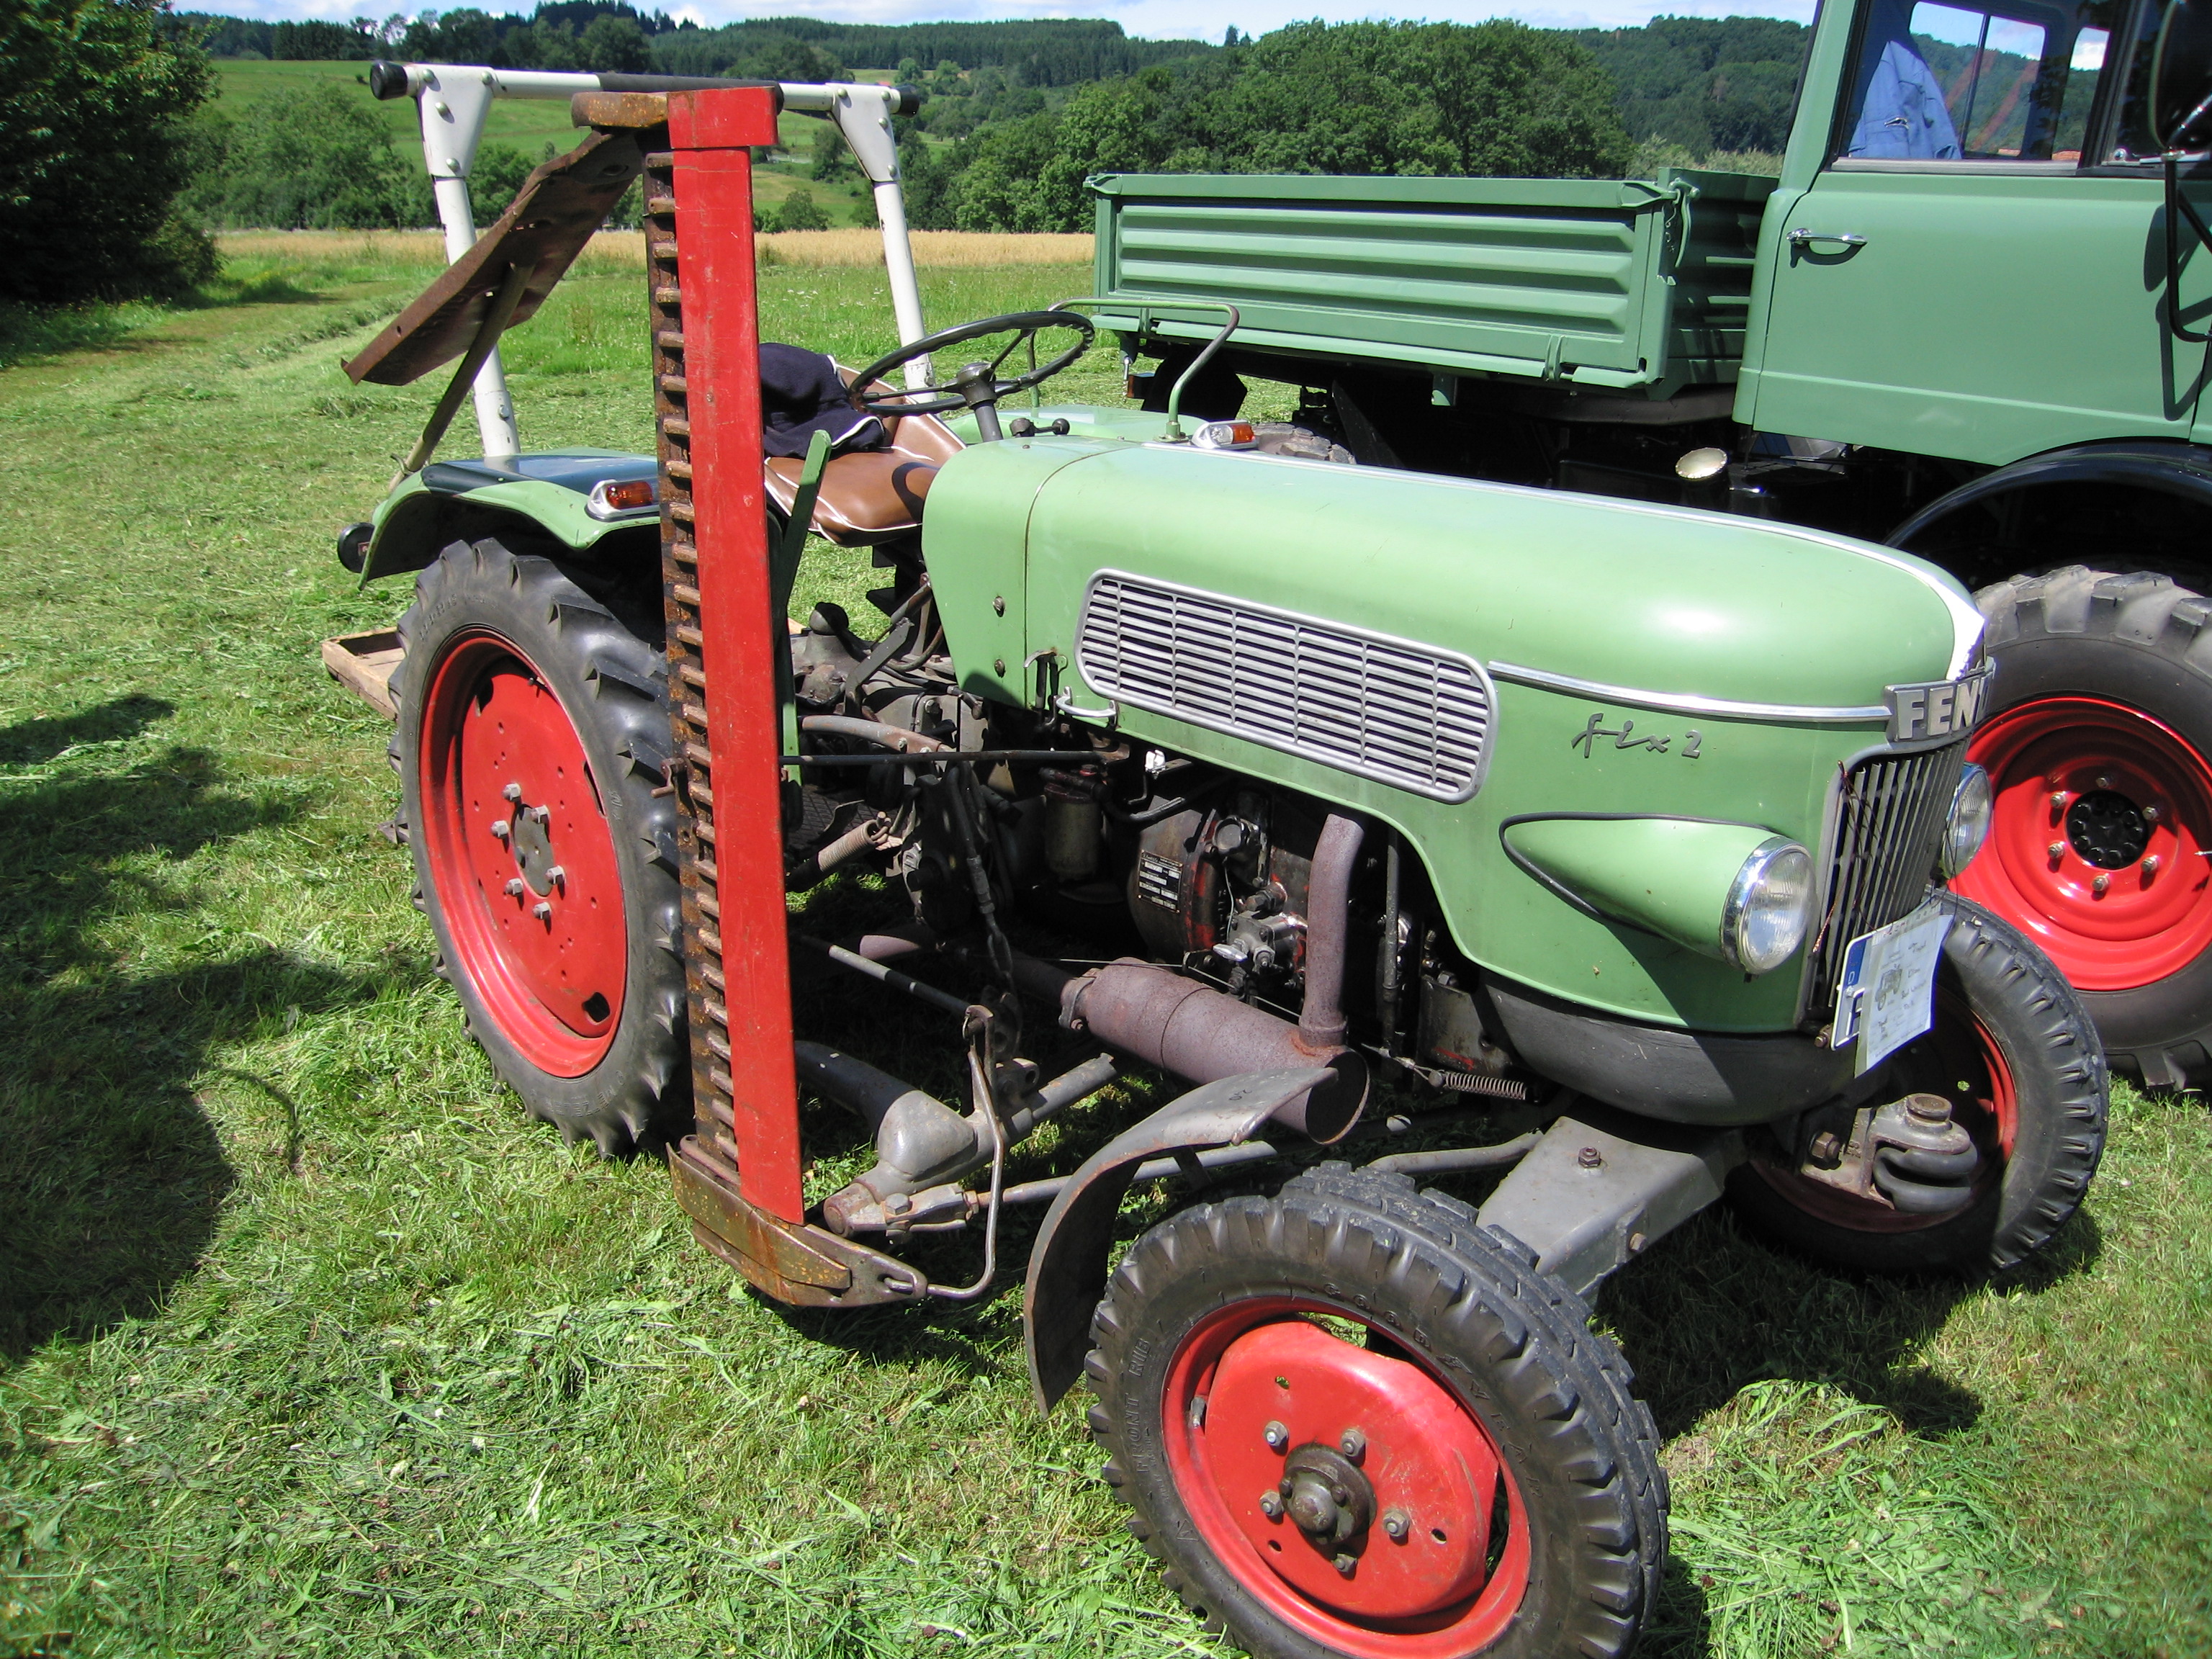 ... Copyrighted free use //commons.wikimedia.org/wiki/File:Fendt_Fix2.JPG